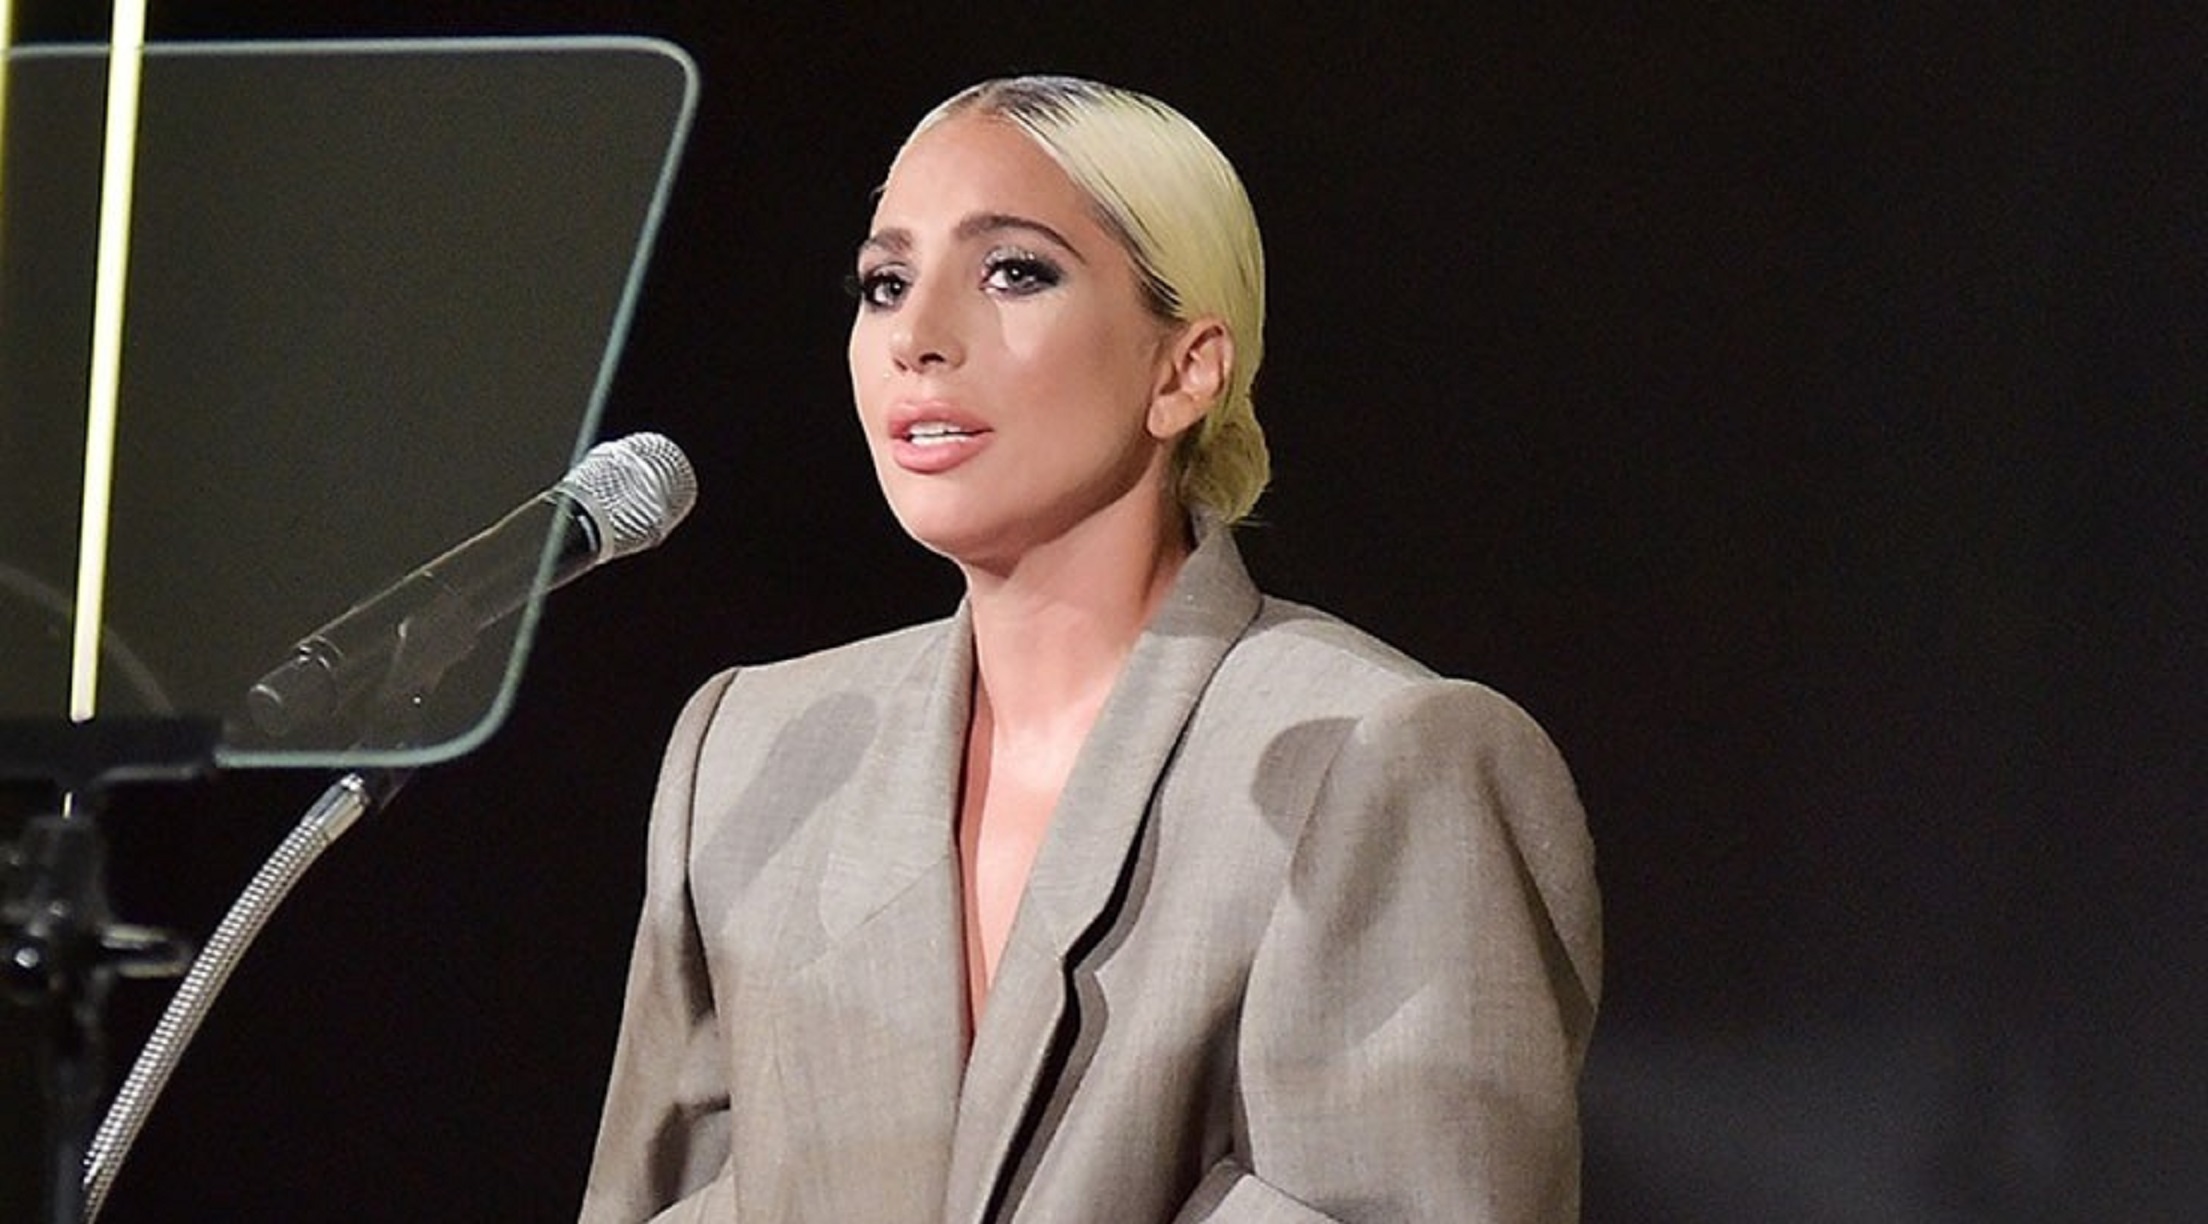 Lady Gaga Opens Up About Her Mental Health Issues and ‘Suicidal Thoughts’